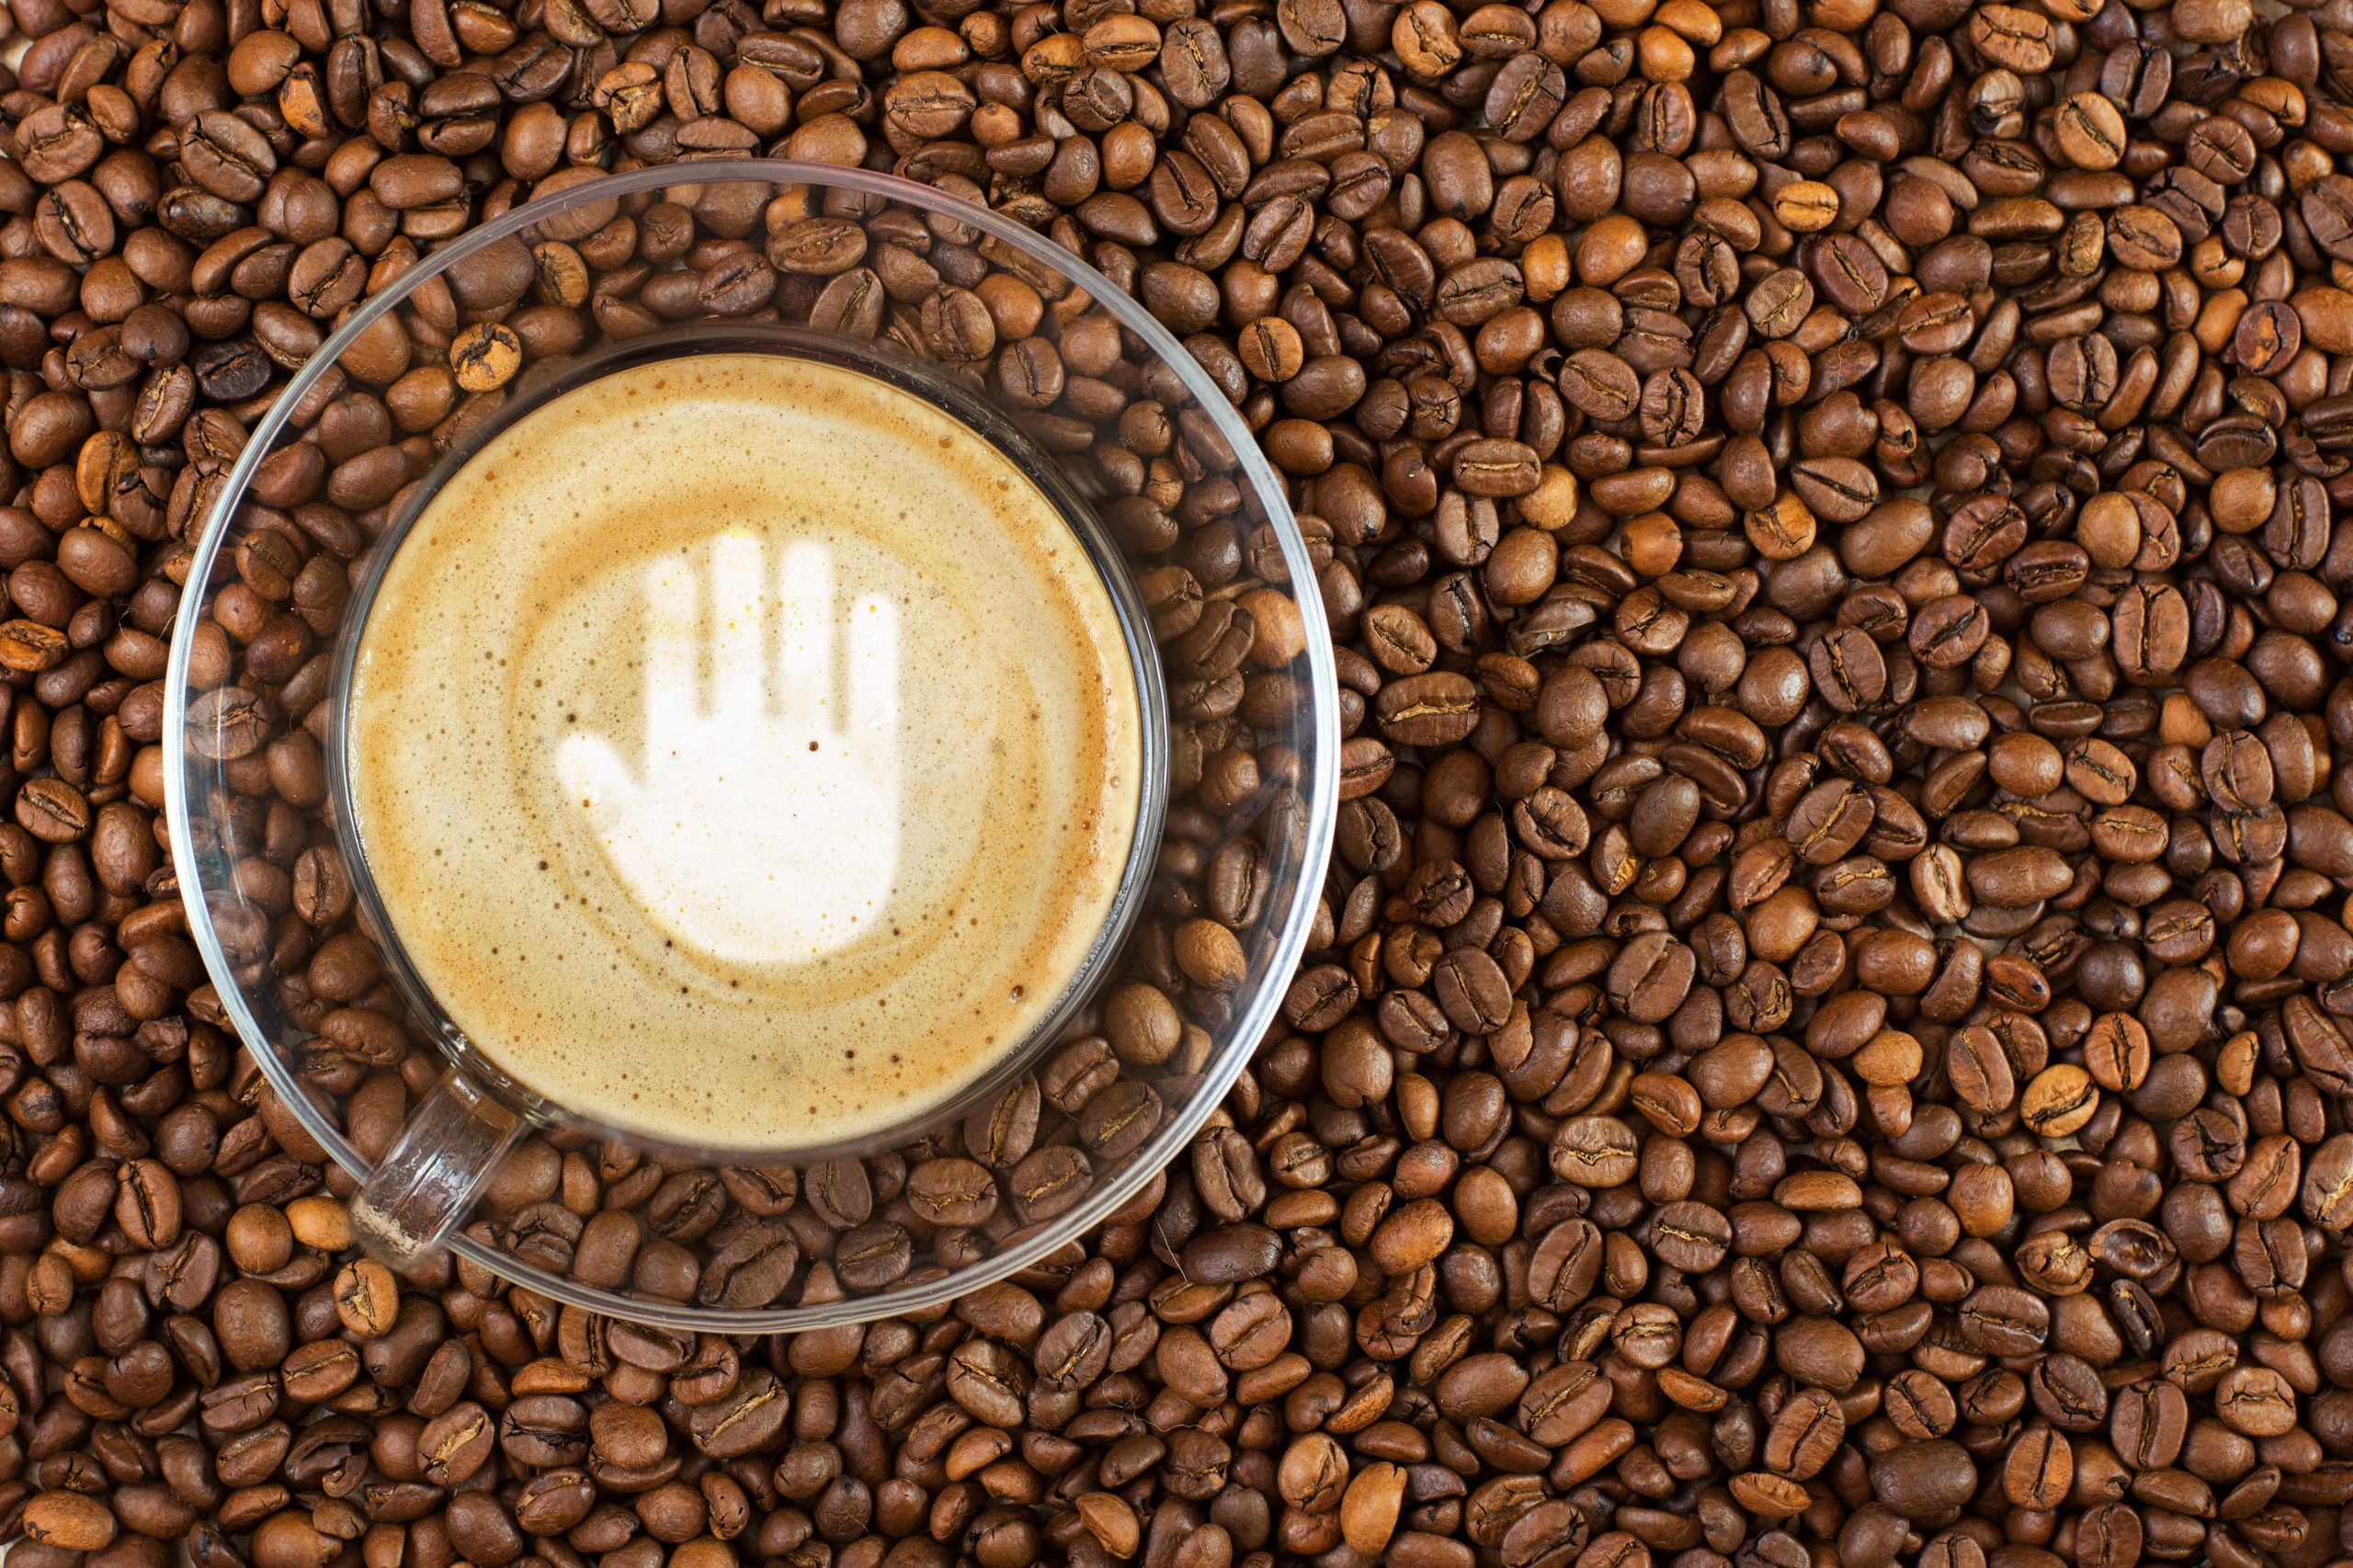 Cup of espresso with stop gesture sign on coffee foam on coffee beans background. With copy space